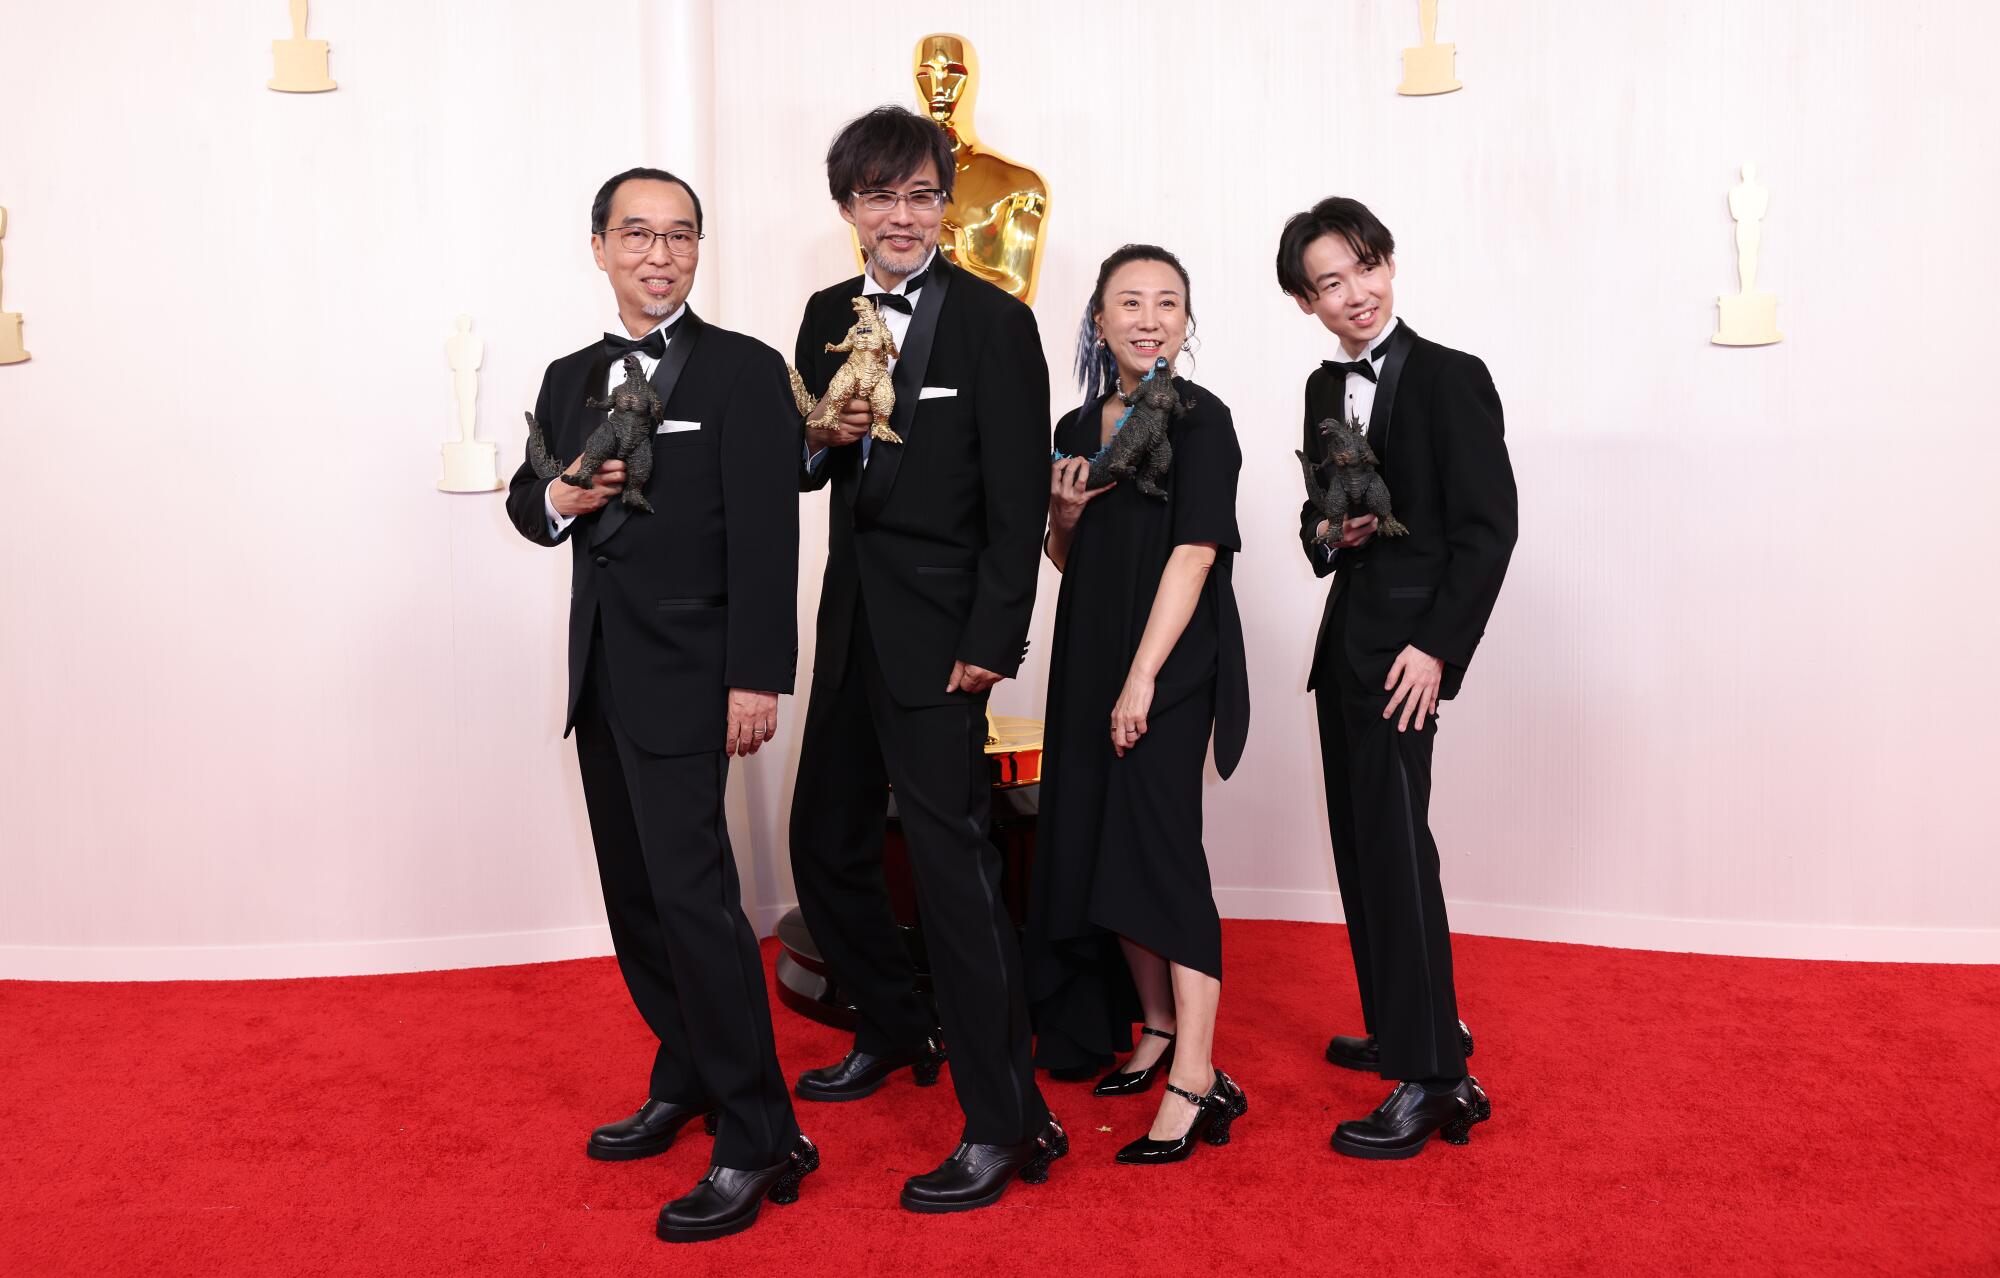 Three men and a woman pose with Godzilla toys.